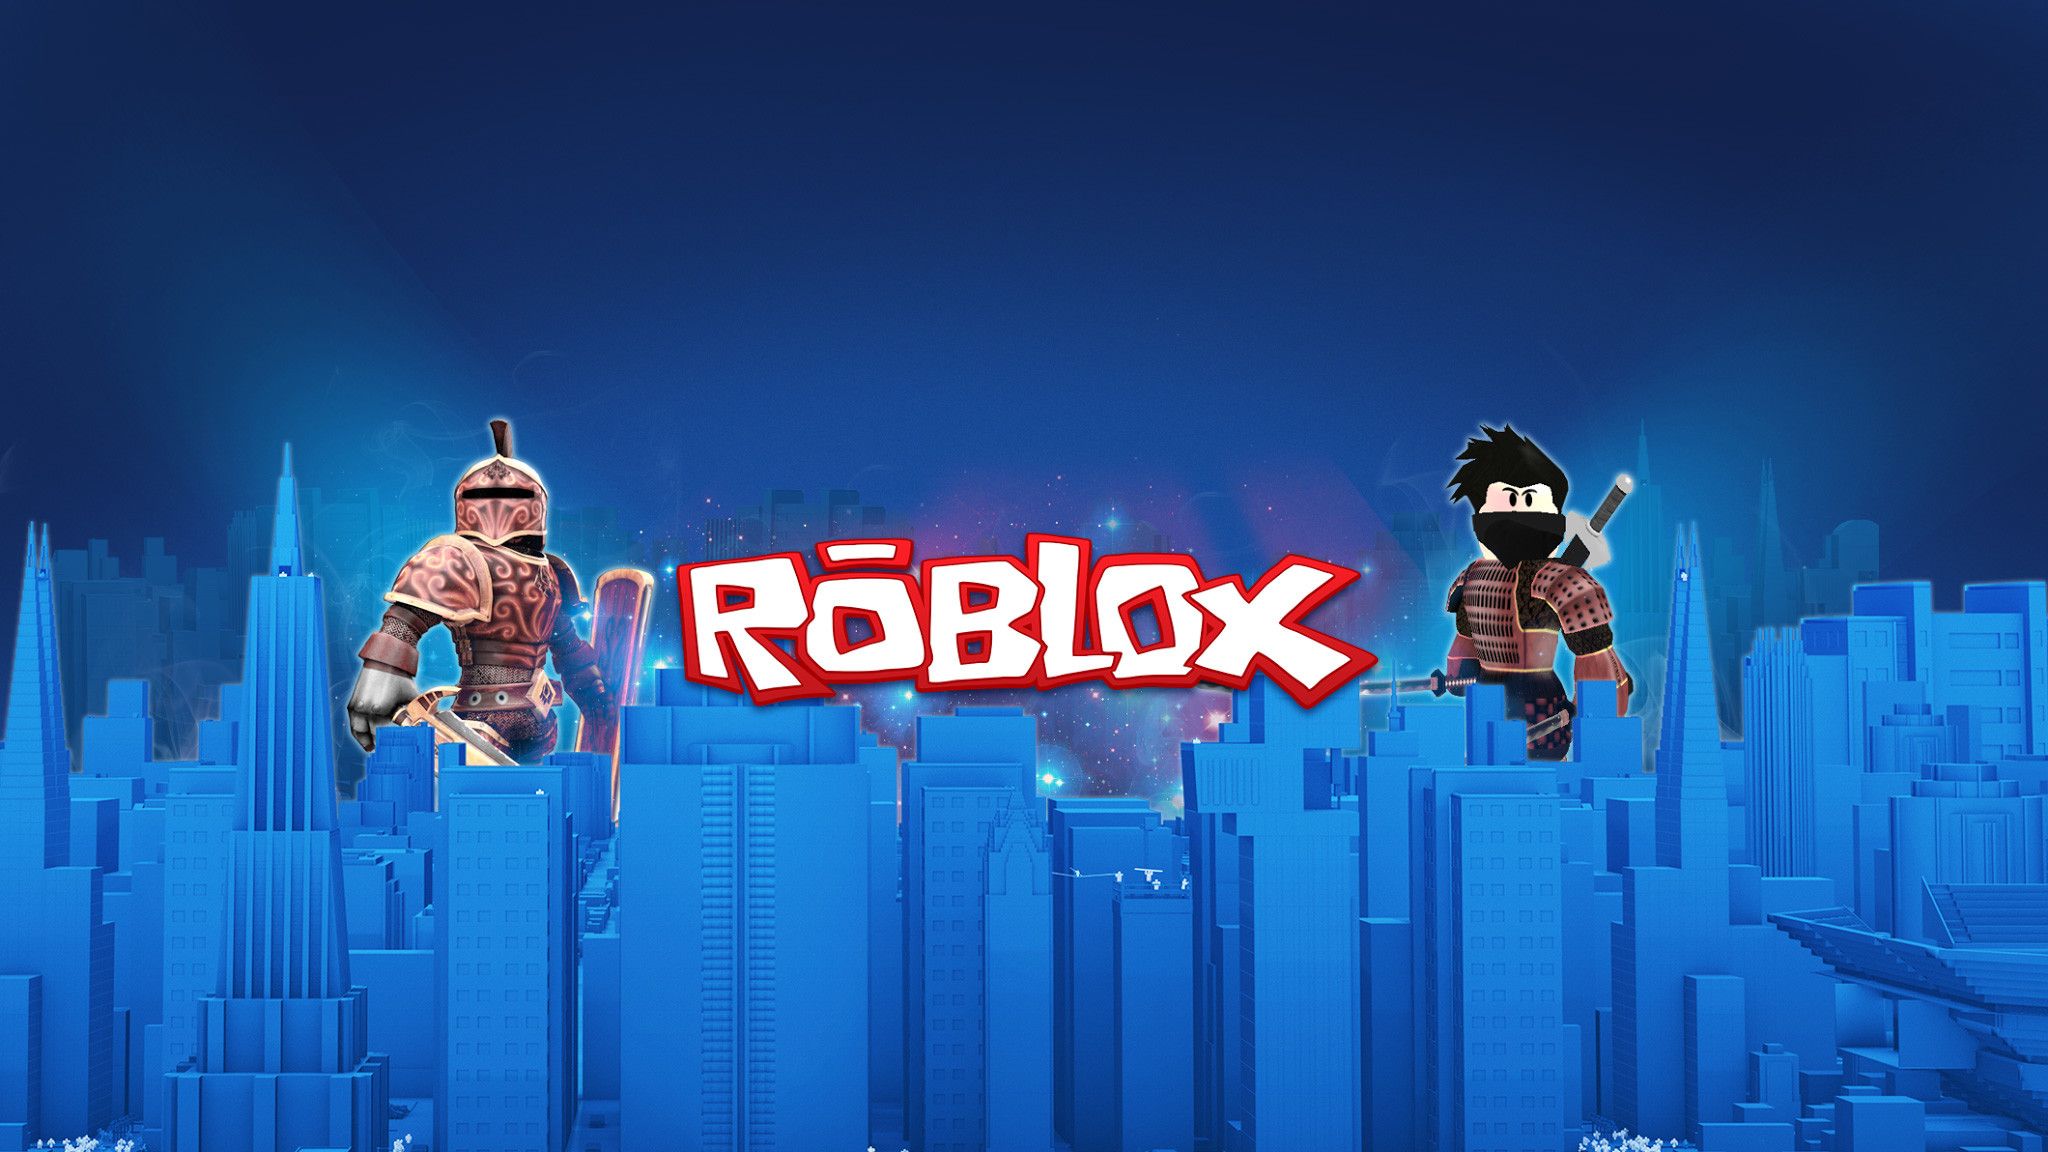 Roblox Wallpaper Hd Kolpaper Awesome Free Hd Wallpapers - cool roblox backgrounds designs